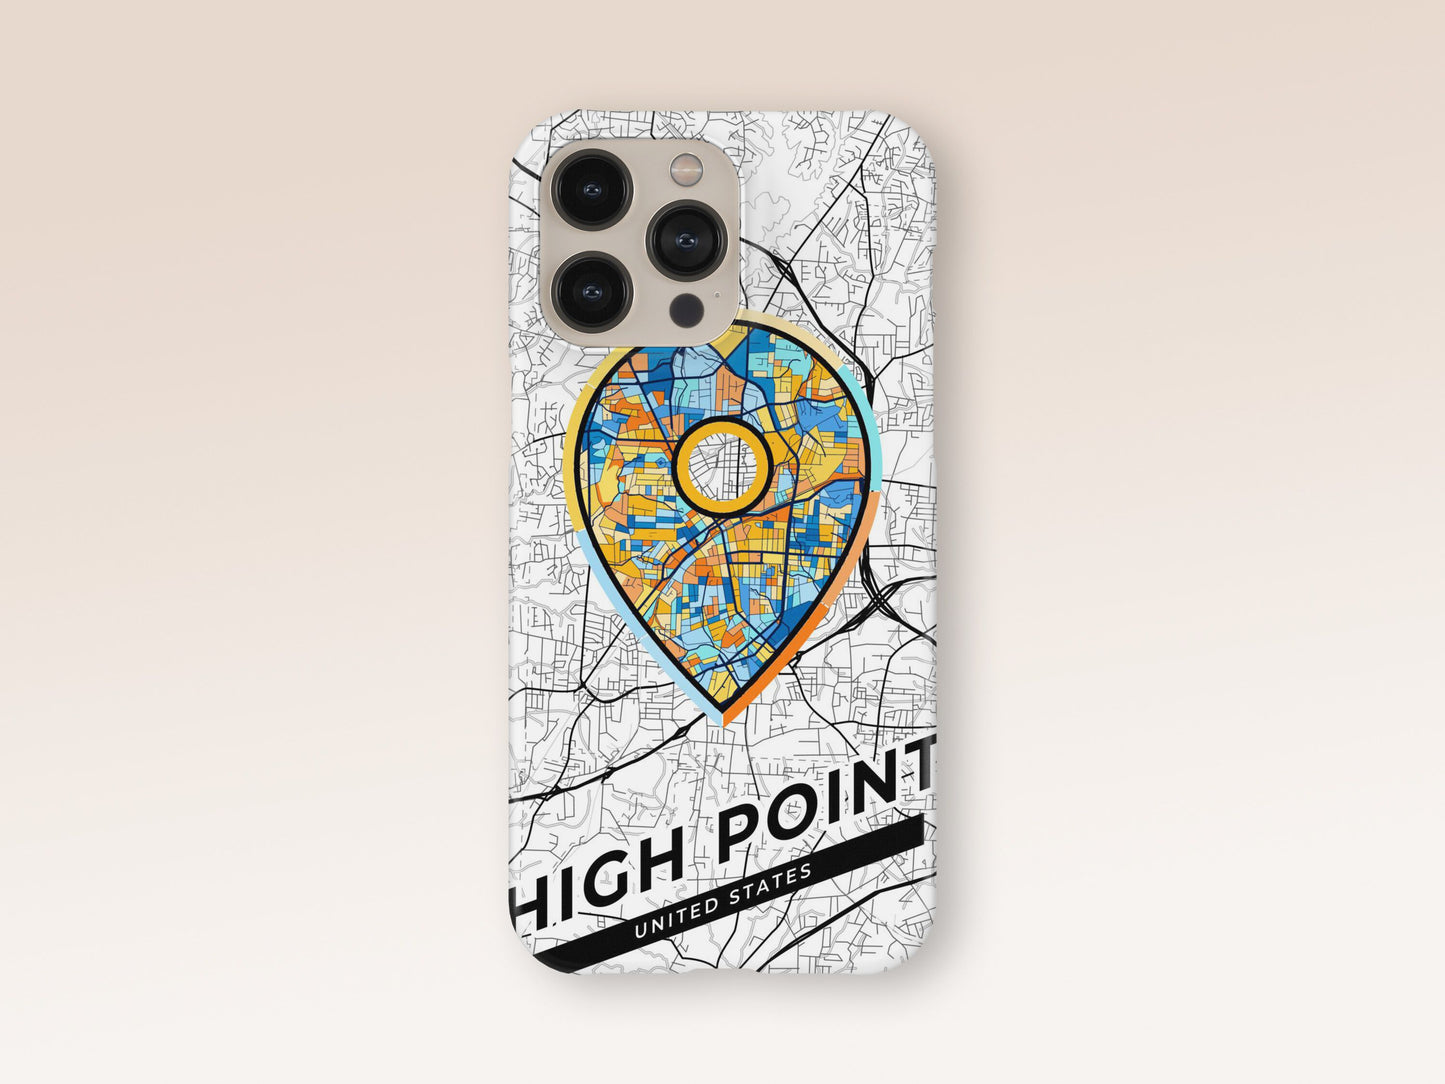 High Point North Carolina slim phone case with colorful icon. Birthday, wedding or housewarming gift. Couple match cases. 1